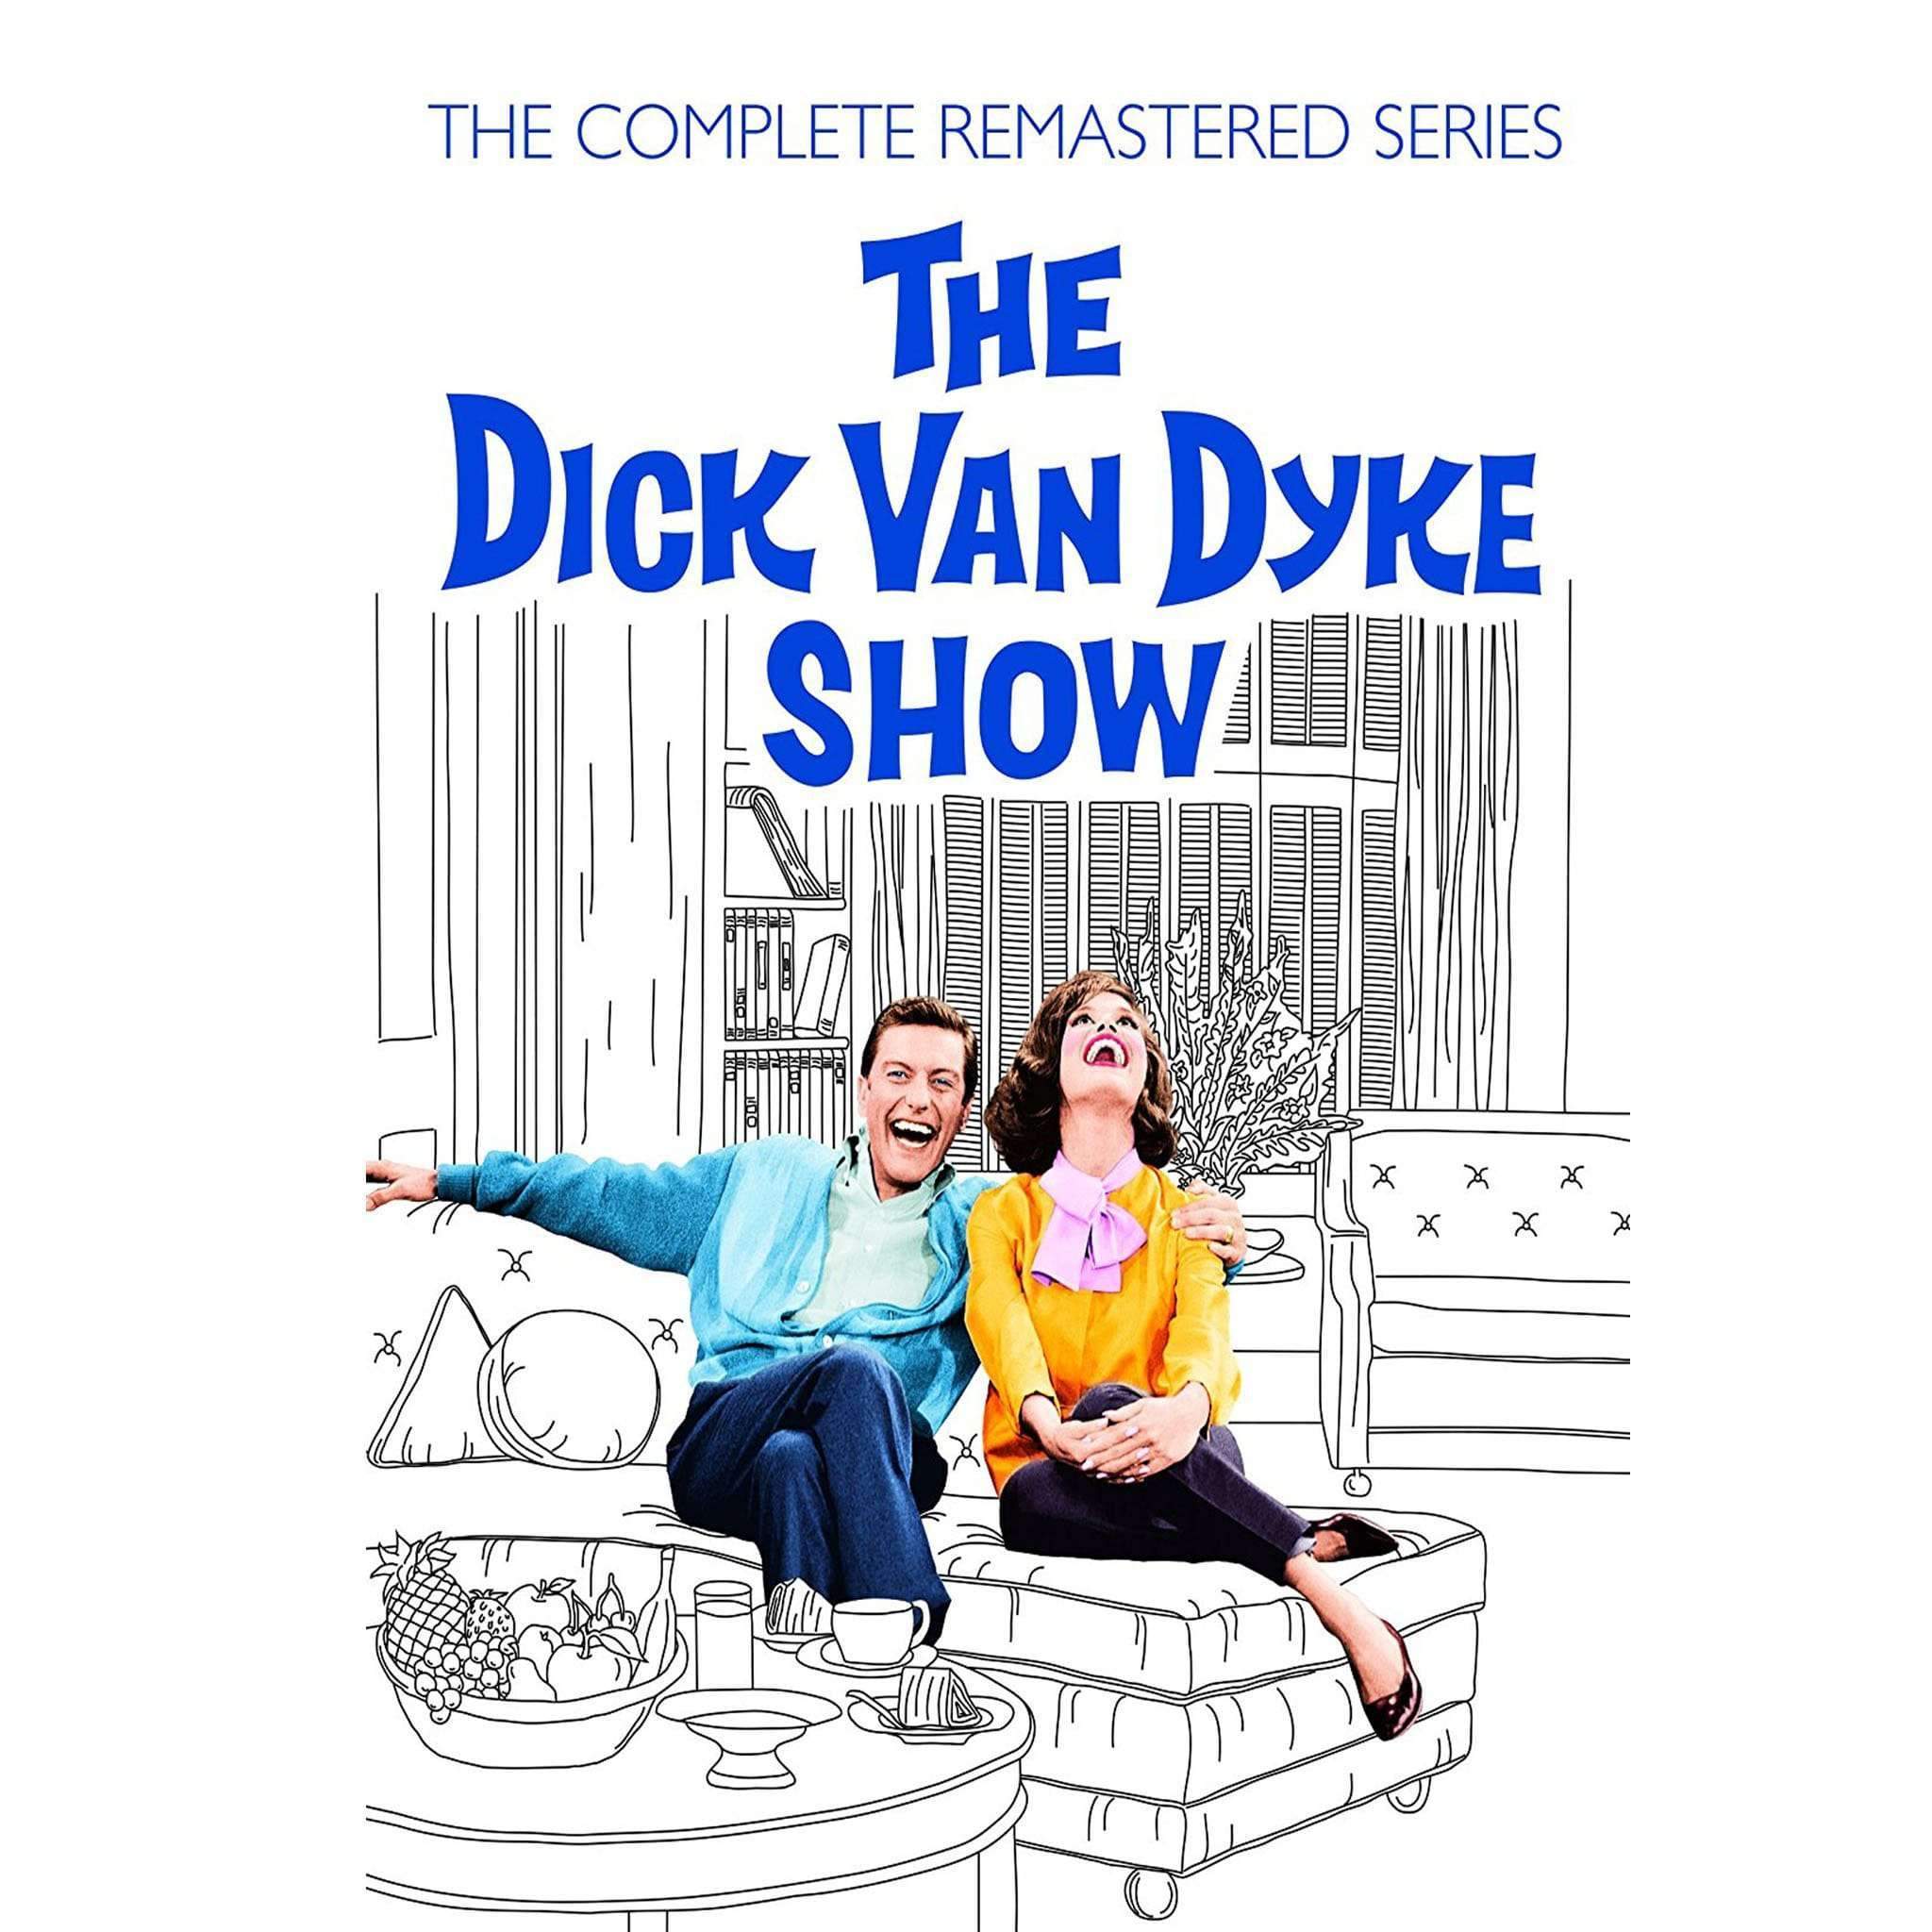 The Dick Van Dyke Show DVD Complete Series Box Set Image Entertainment DVDs & Blu-ray Discs > DVDs > Box Sets